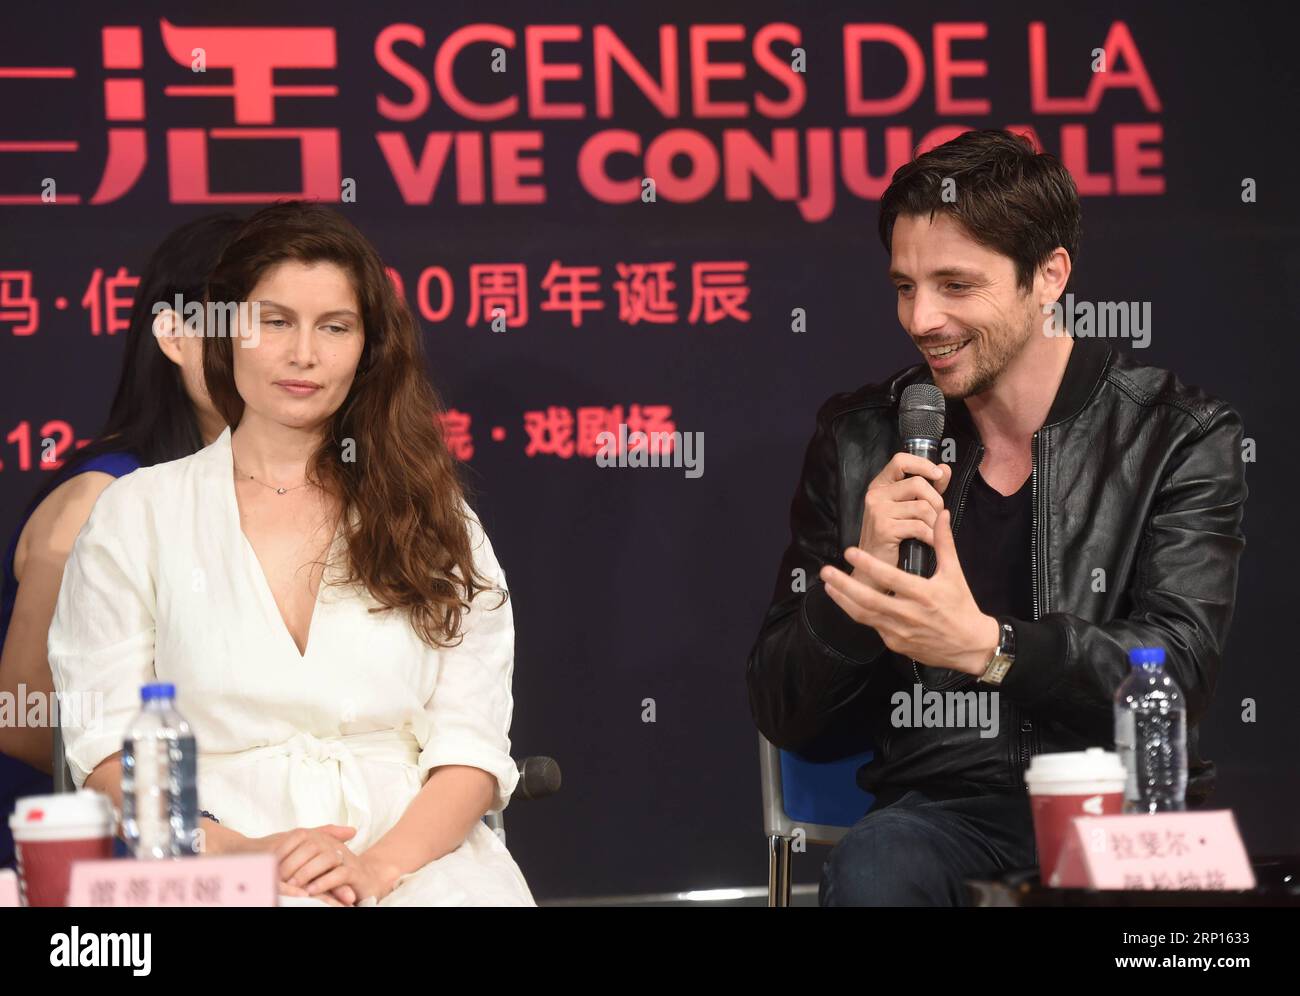 (180611) -- BEIJING, June 11, 2018 -- Actress Laetitia Casta (L) and actor Raphael Personnaz attend a salon of the drama Scenes De La Vie Conjugale at the National Center for the Performing Arts in Beijing, capital of China, June 11, 2018. The drama is adapted from Ingmar Bergman s film with the same title. It will be staged on June 12 and 13 in Beijing. )(mcg) CHINA-BEIJING-DRAMA-SALON (CN) LuoxXiaoguang PUBLICATIONxNOTxINxCHN Stock Photo